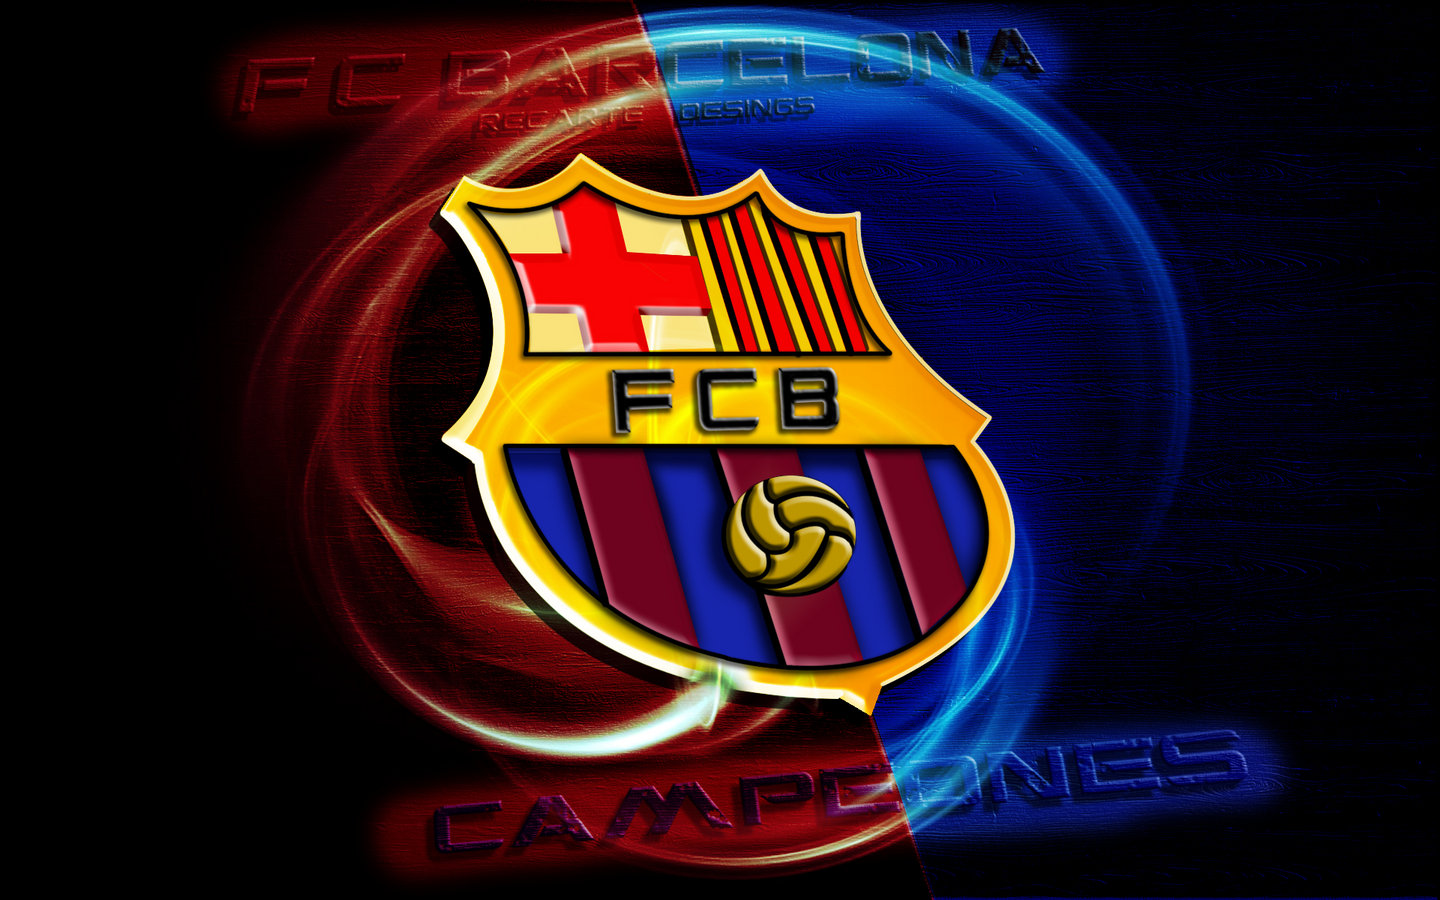 ALL SPORTS CELEBRITIES FC Barcelona Logos New HD Wallpapers 2013